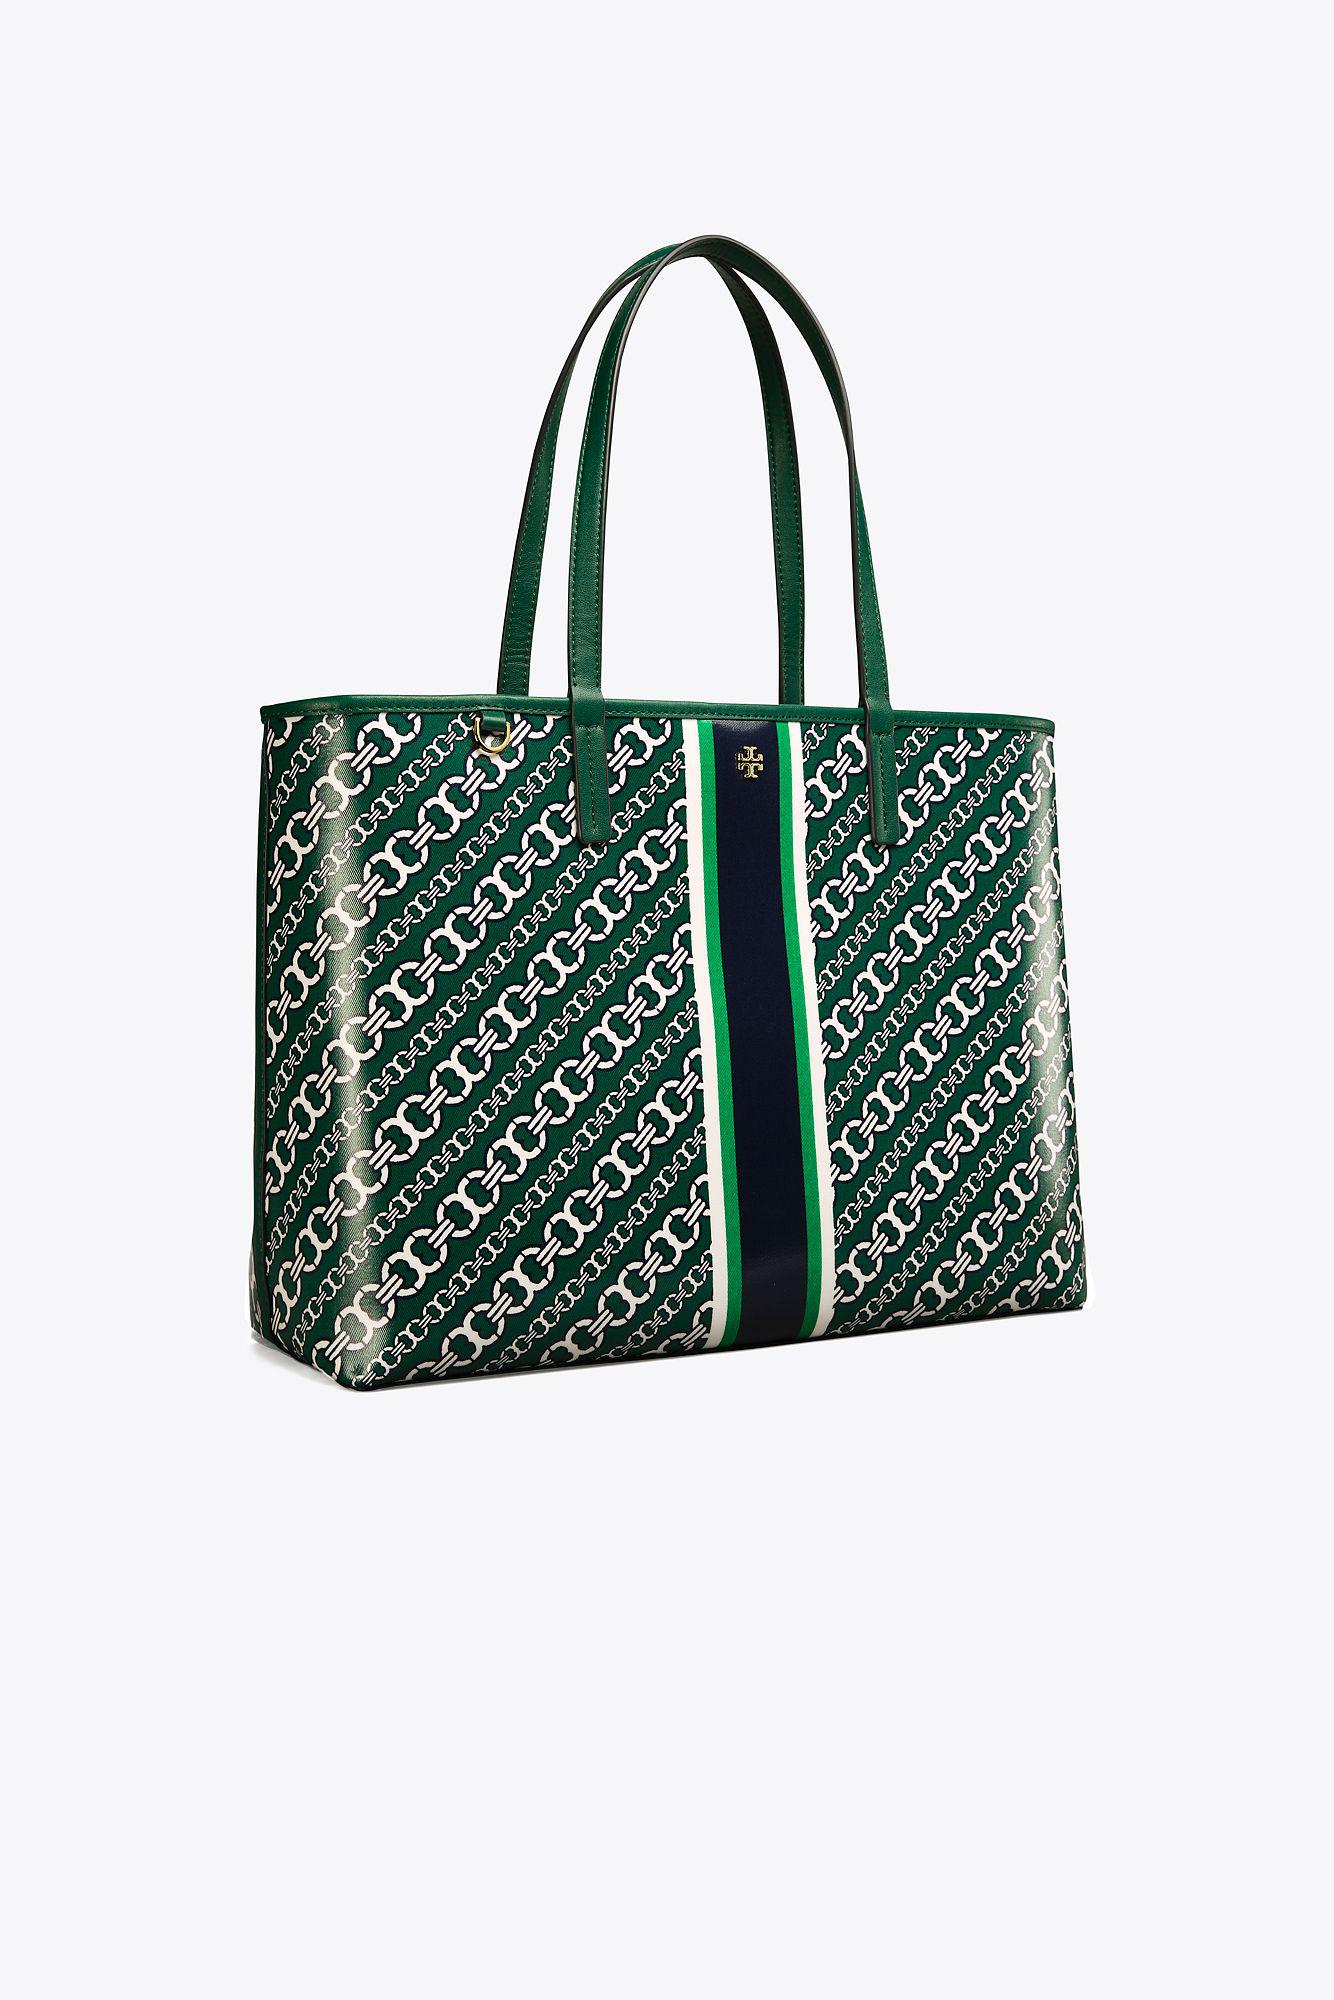 Tory Burch Gemini Link Canvas Small Top-zip Tote in Green